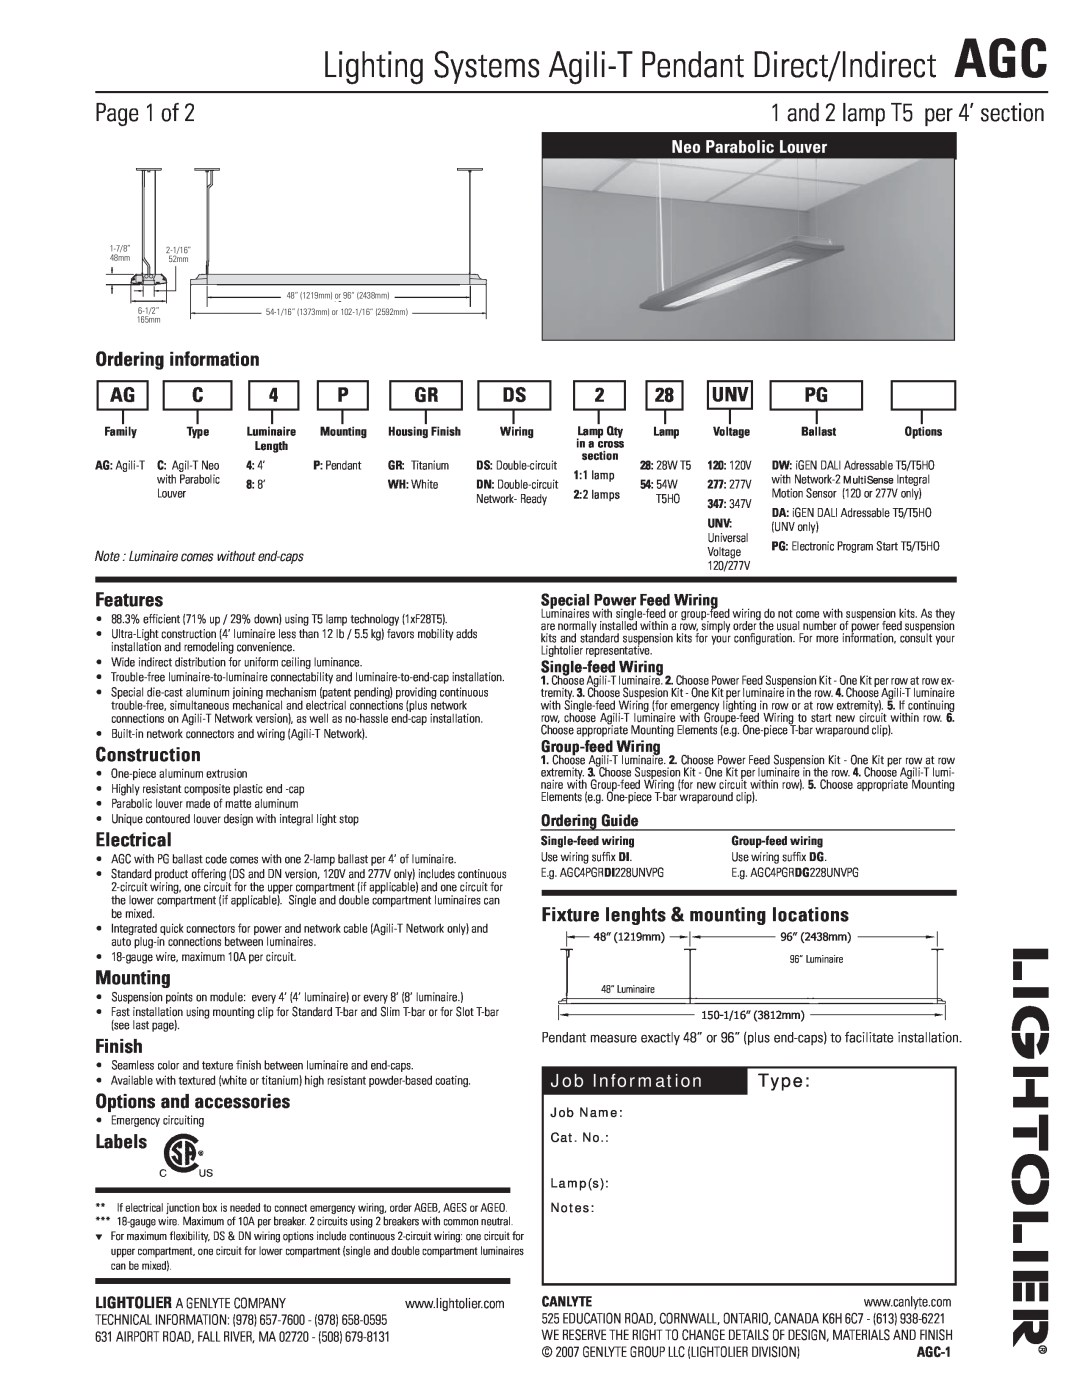 Lightolier AGC manual Page 1 of, and 2 lamp T5 per 4’ section 